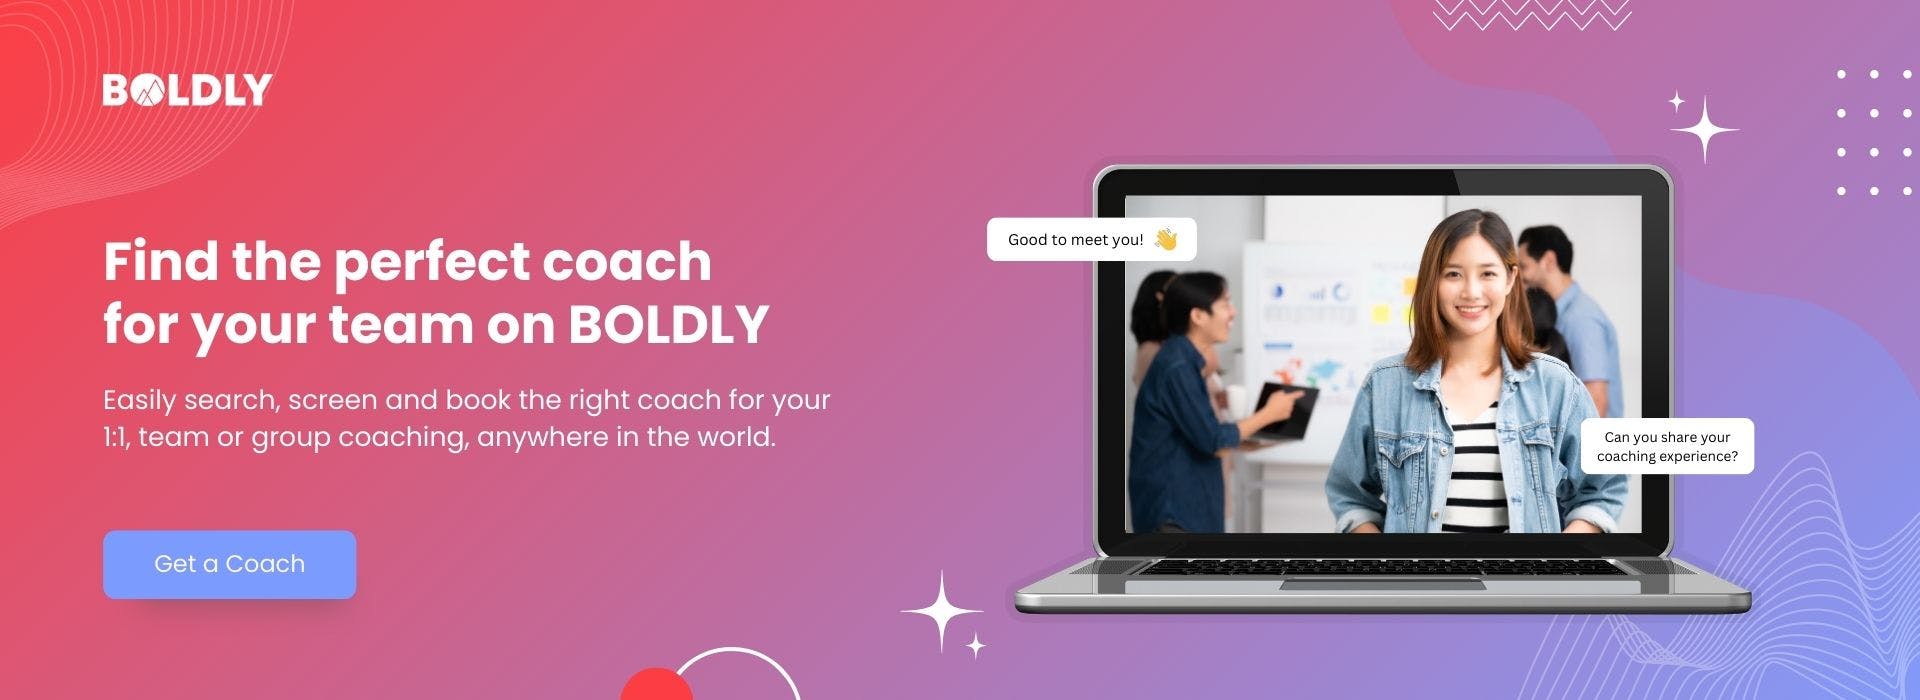 Book a coach by searching BOLDLY's vast network of coaches, anywhere in the world.